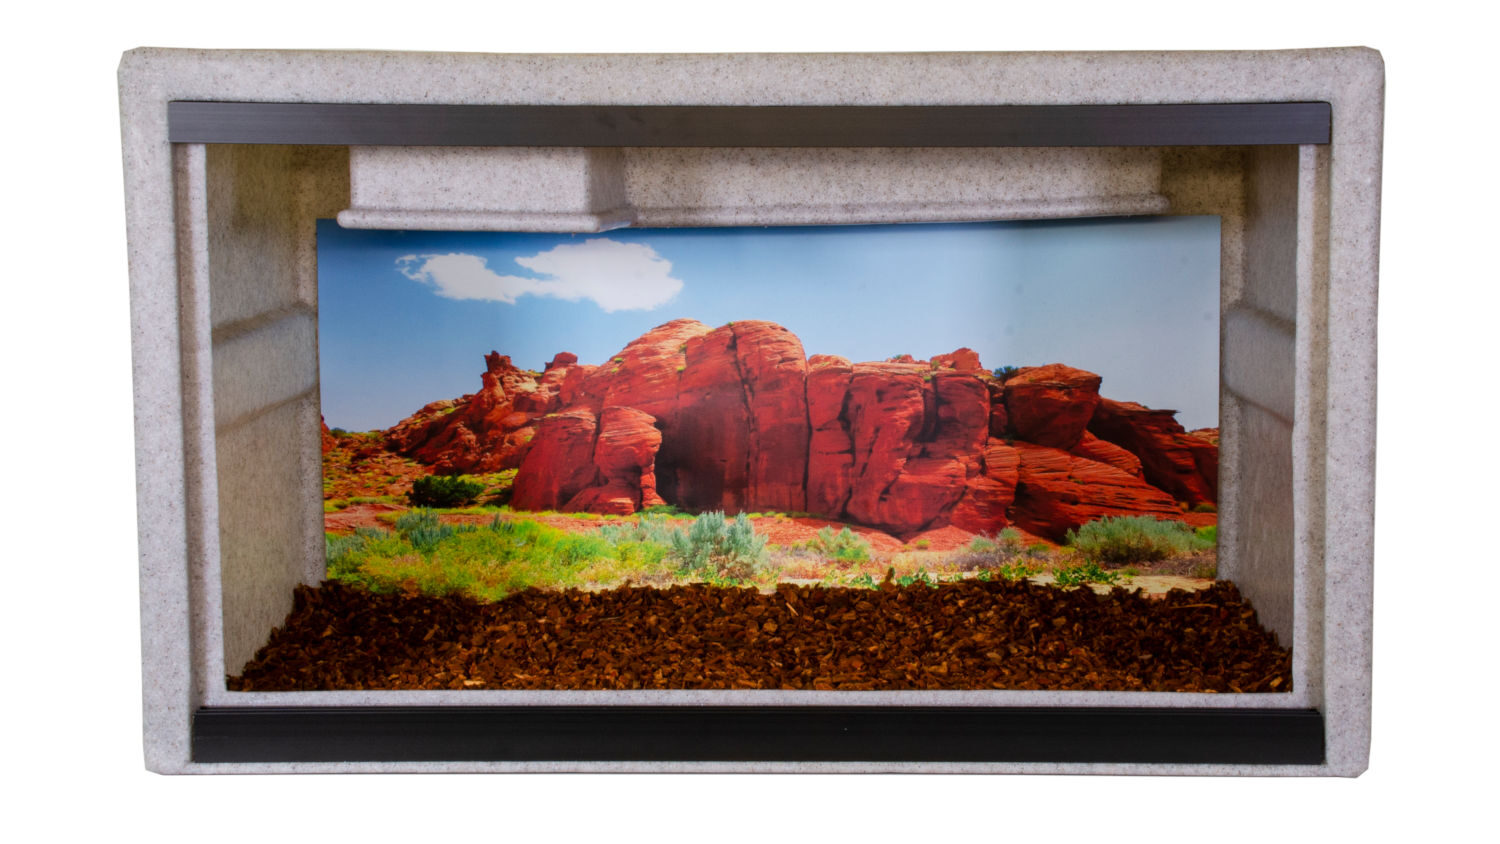 Vision Cage Model 322 - Classic Gray - Desert Rock Formations Background